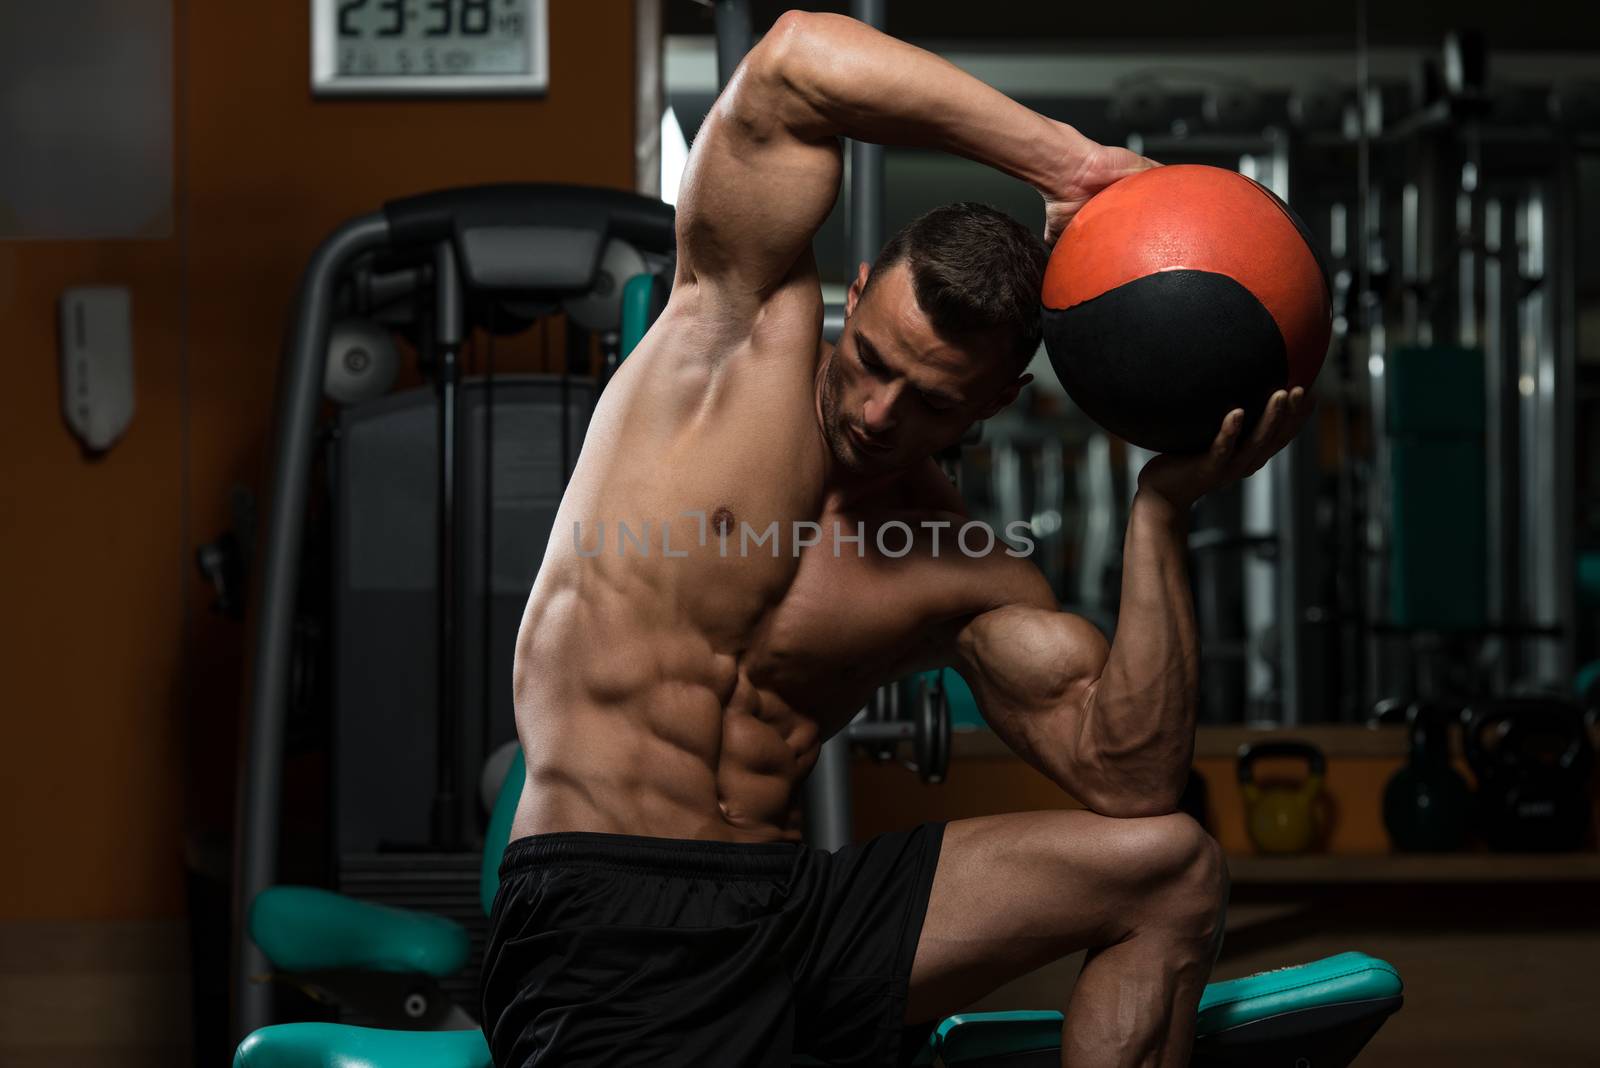 Medical Ball Workout by JalePhoto